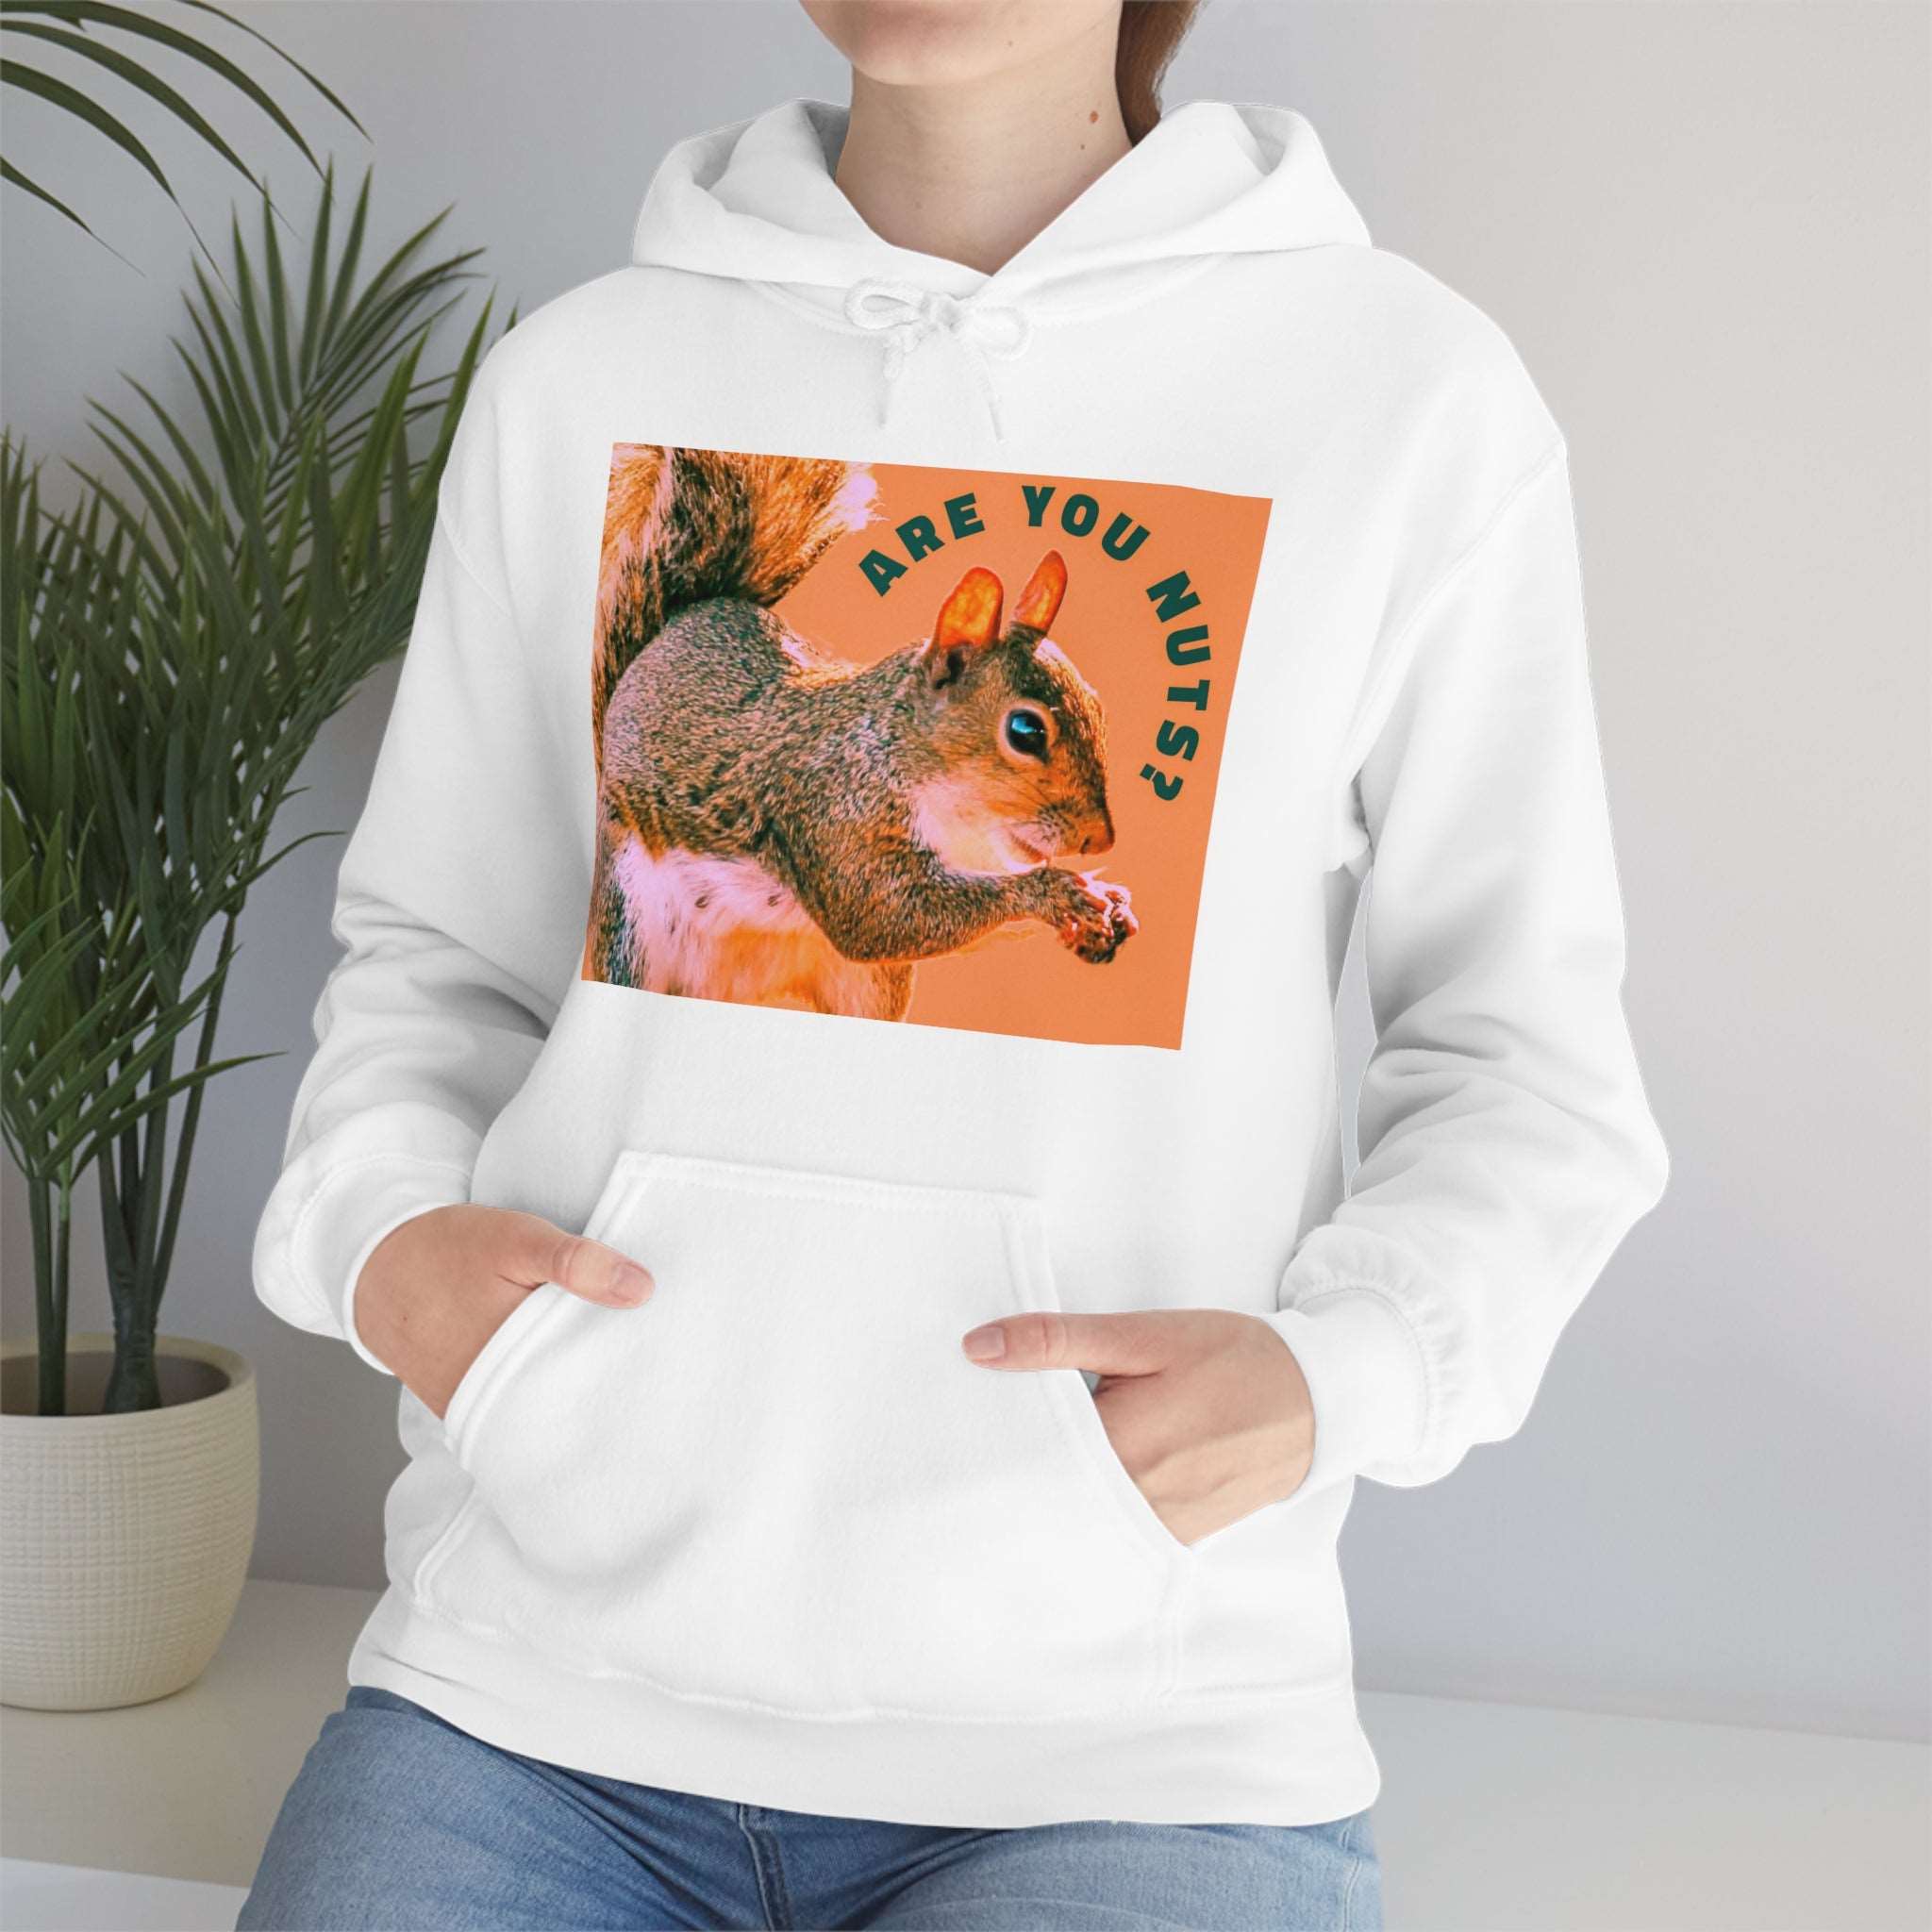 Are you Nuts? Funny Squirrel Unisex Hooded Sweatshirt up to 5XL